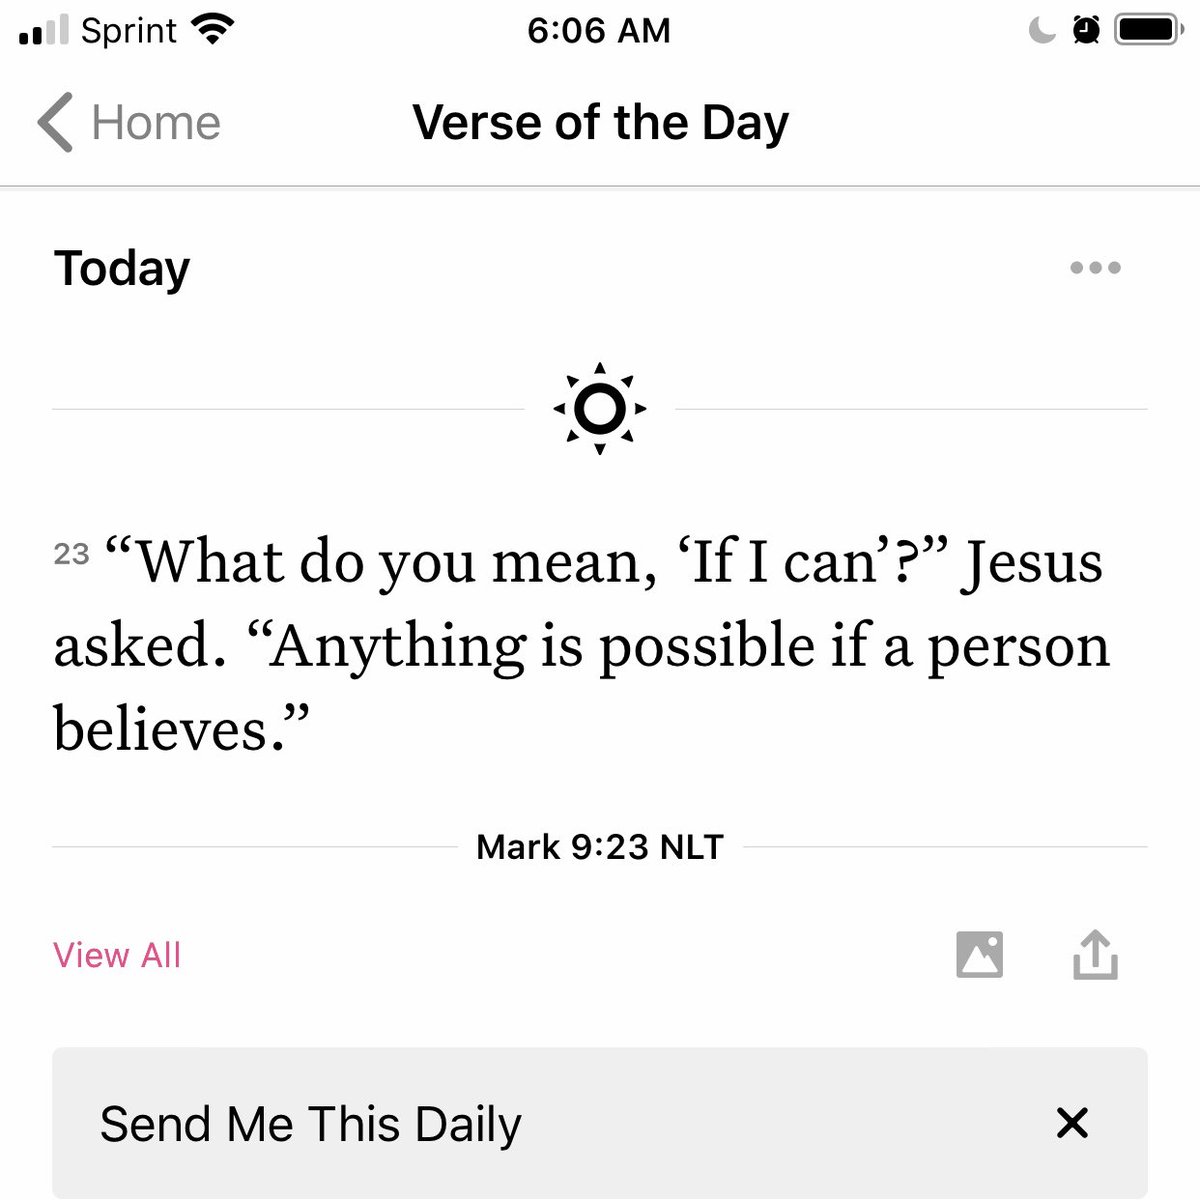 Upon waking up on the 17th, I took a look at the verse of the day - which, if I ain’t never seen no direct Bible verse to me before - was SURELY written for me that day:/17